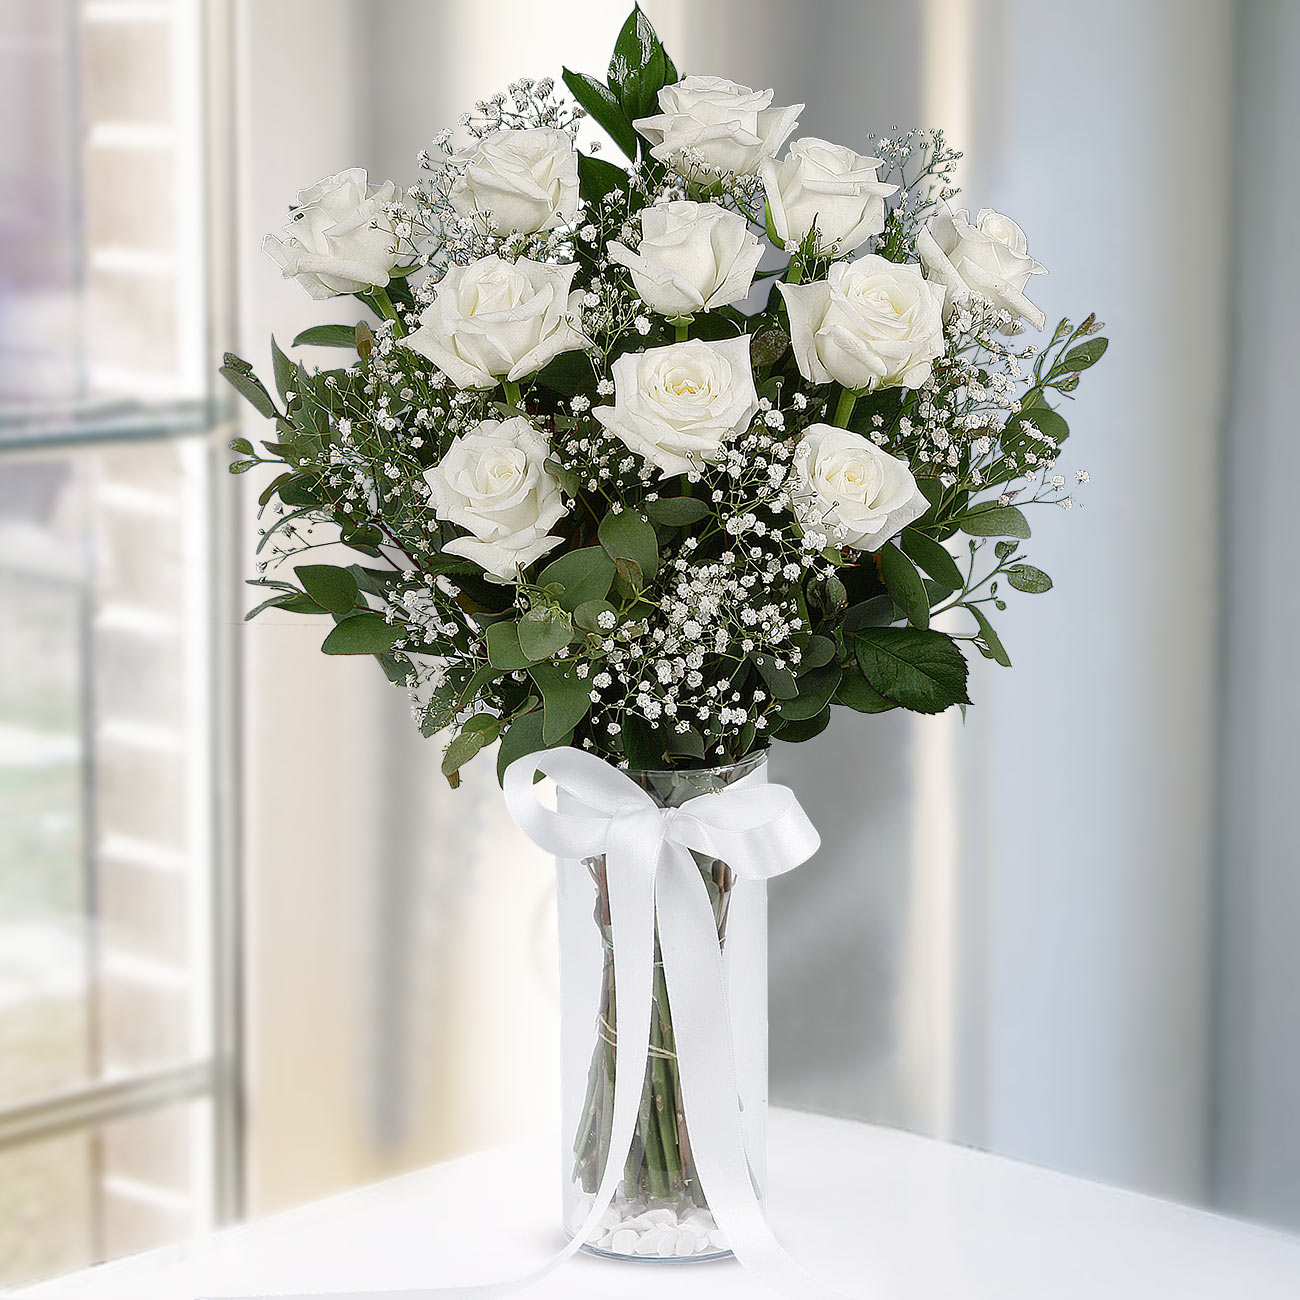 Send flowers Turkey, 11 White Roses in Vase from 16USD